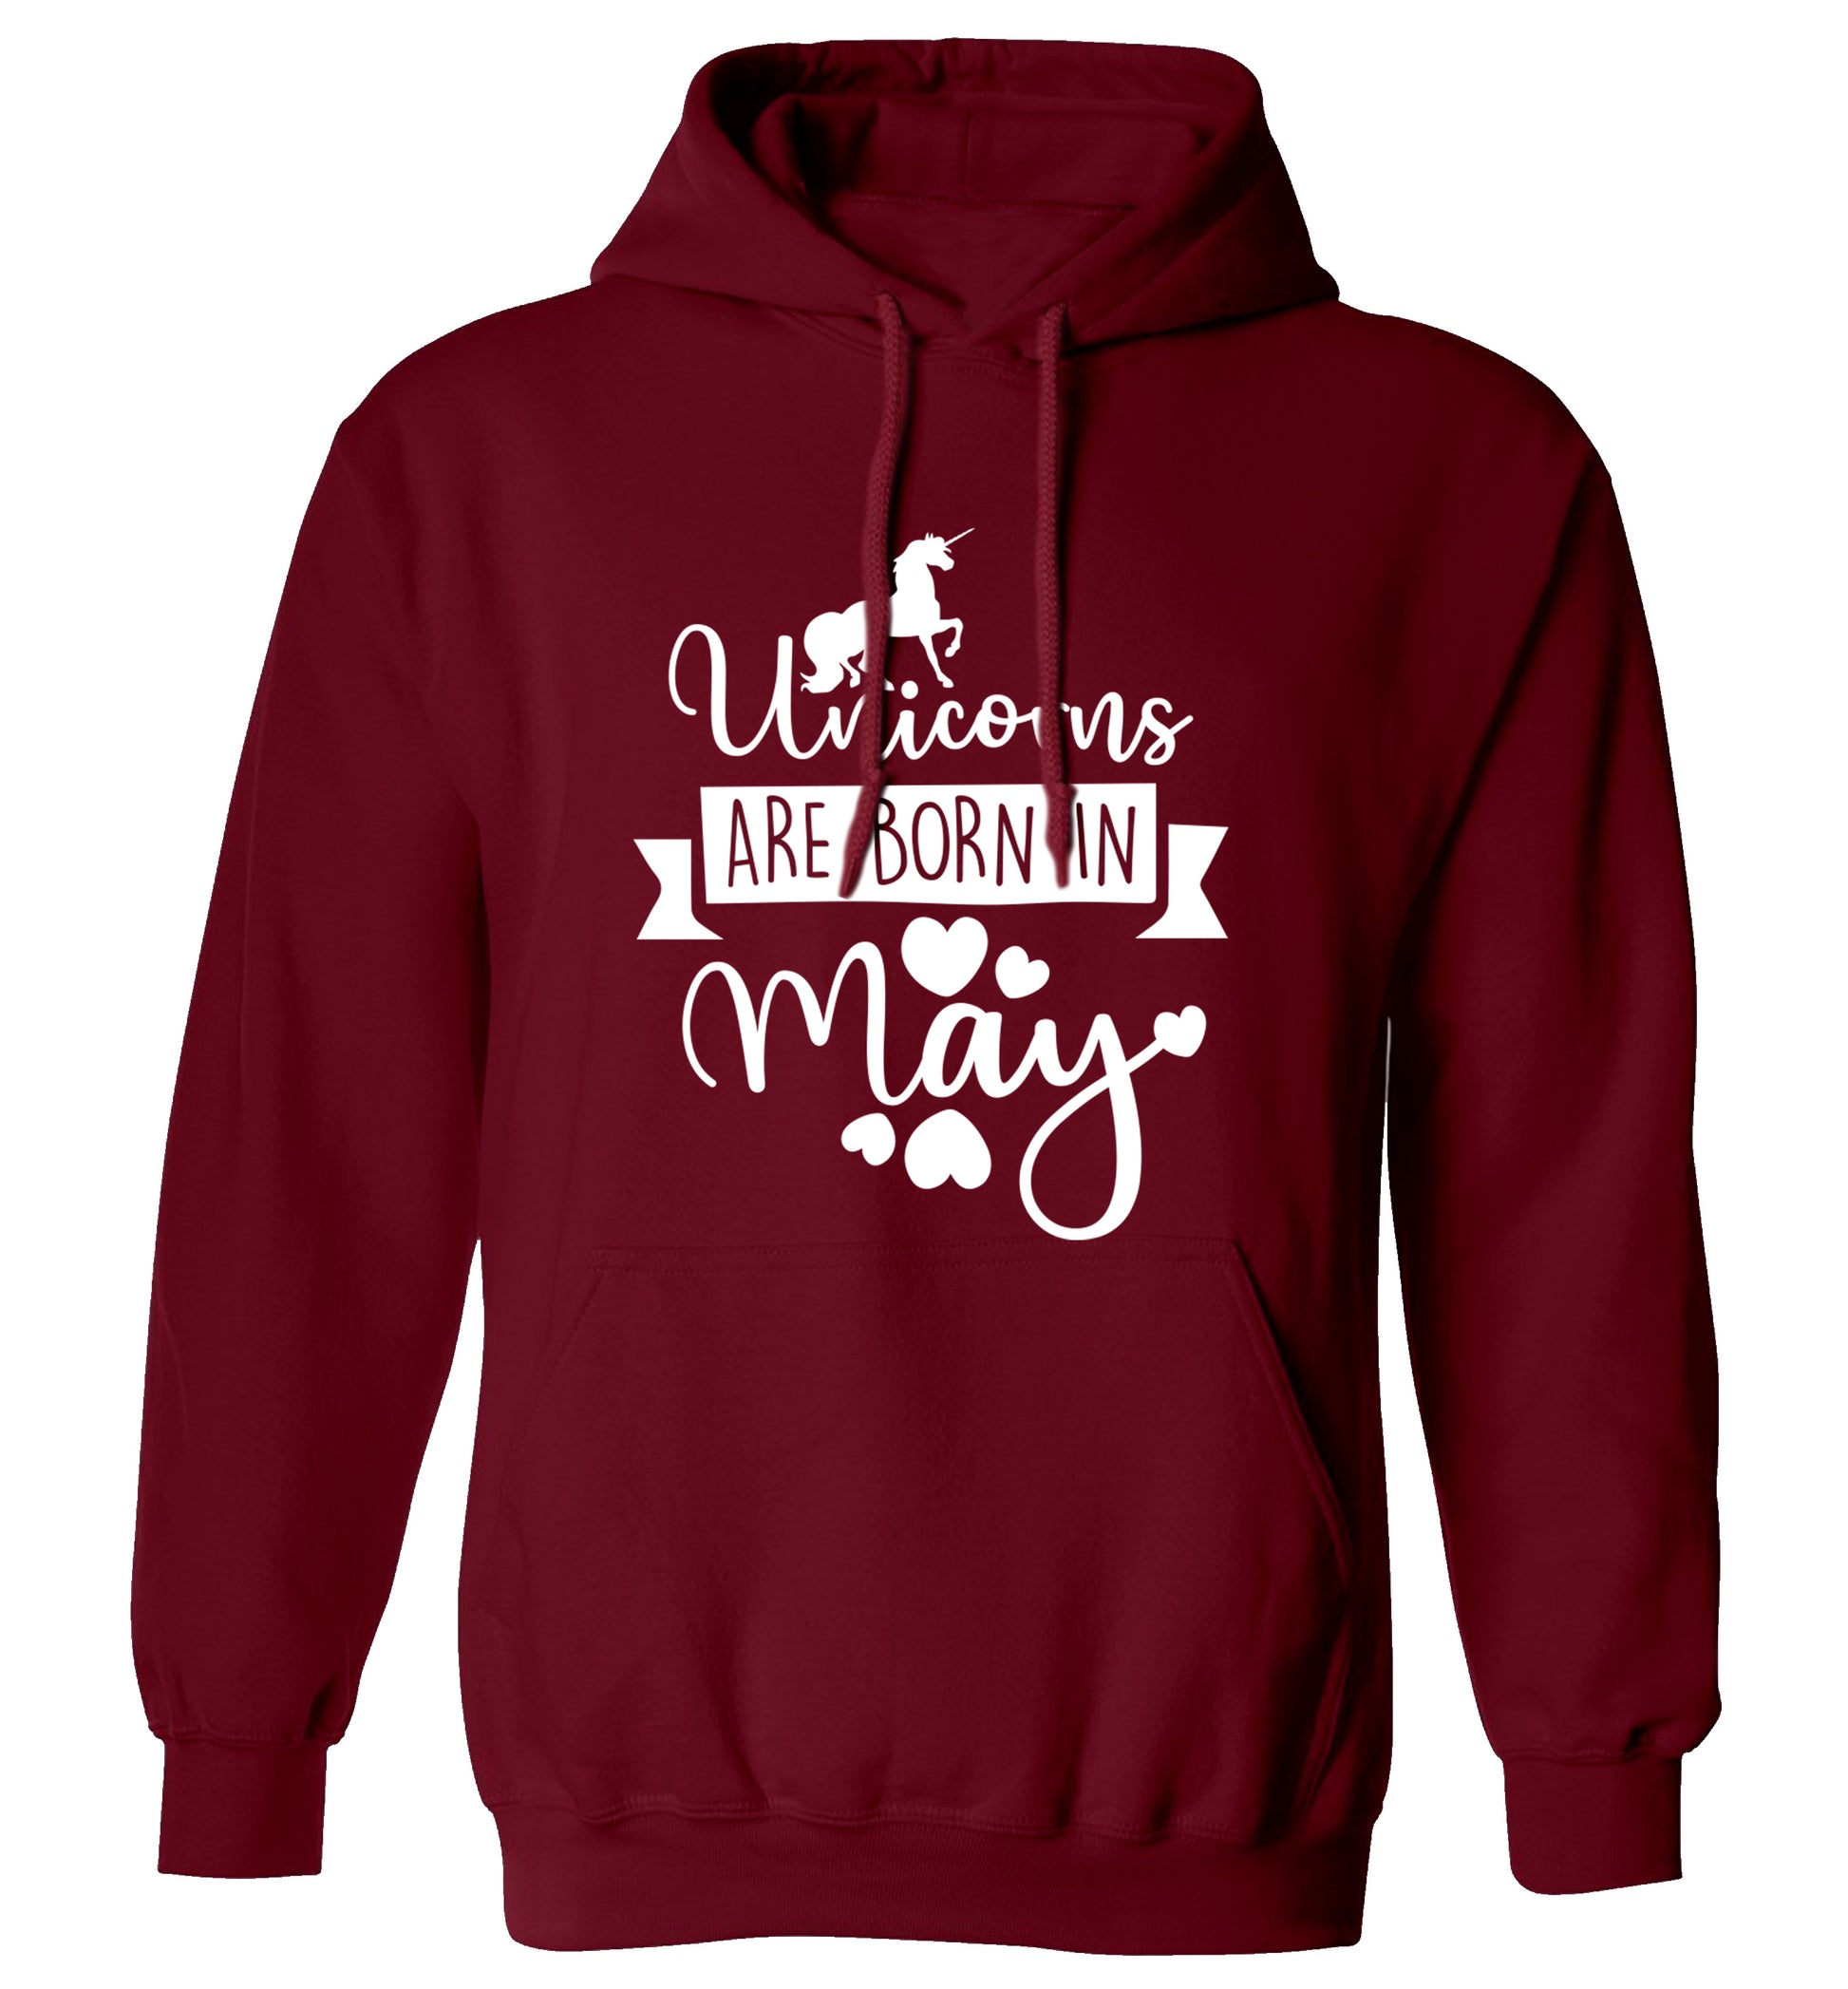 Unicorns are born in May adults unisex maroon hoodie 2XL